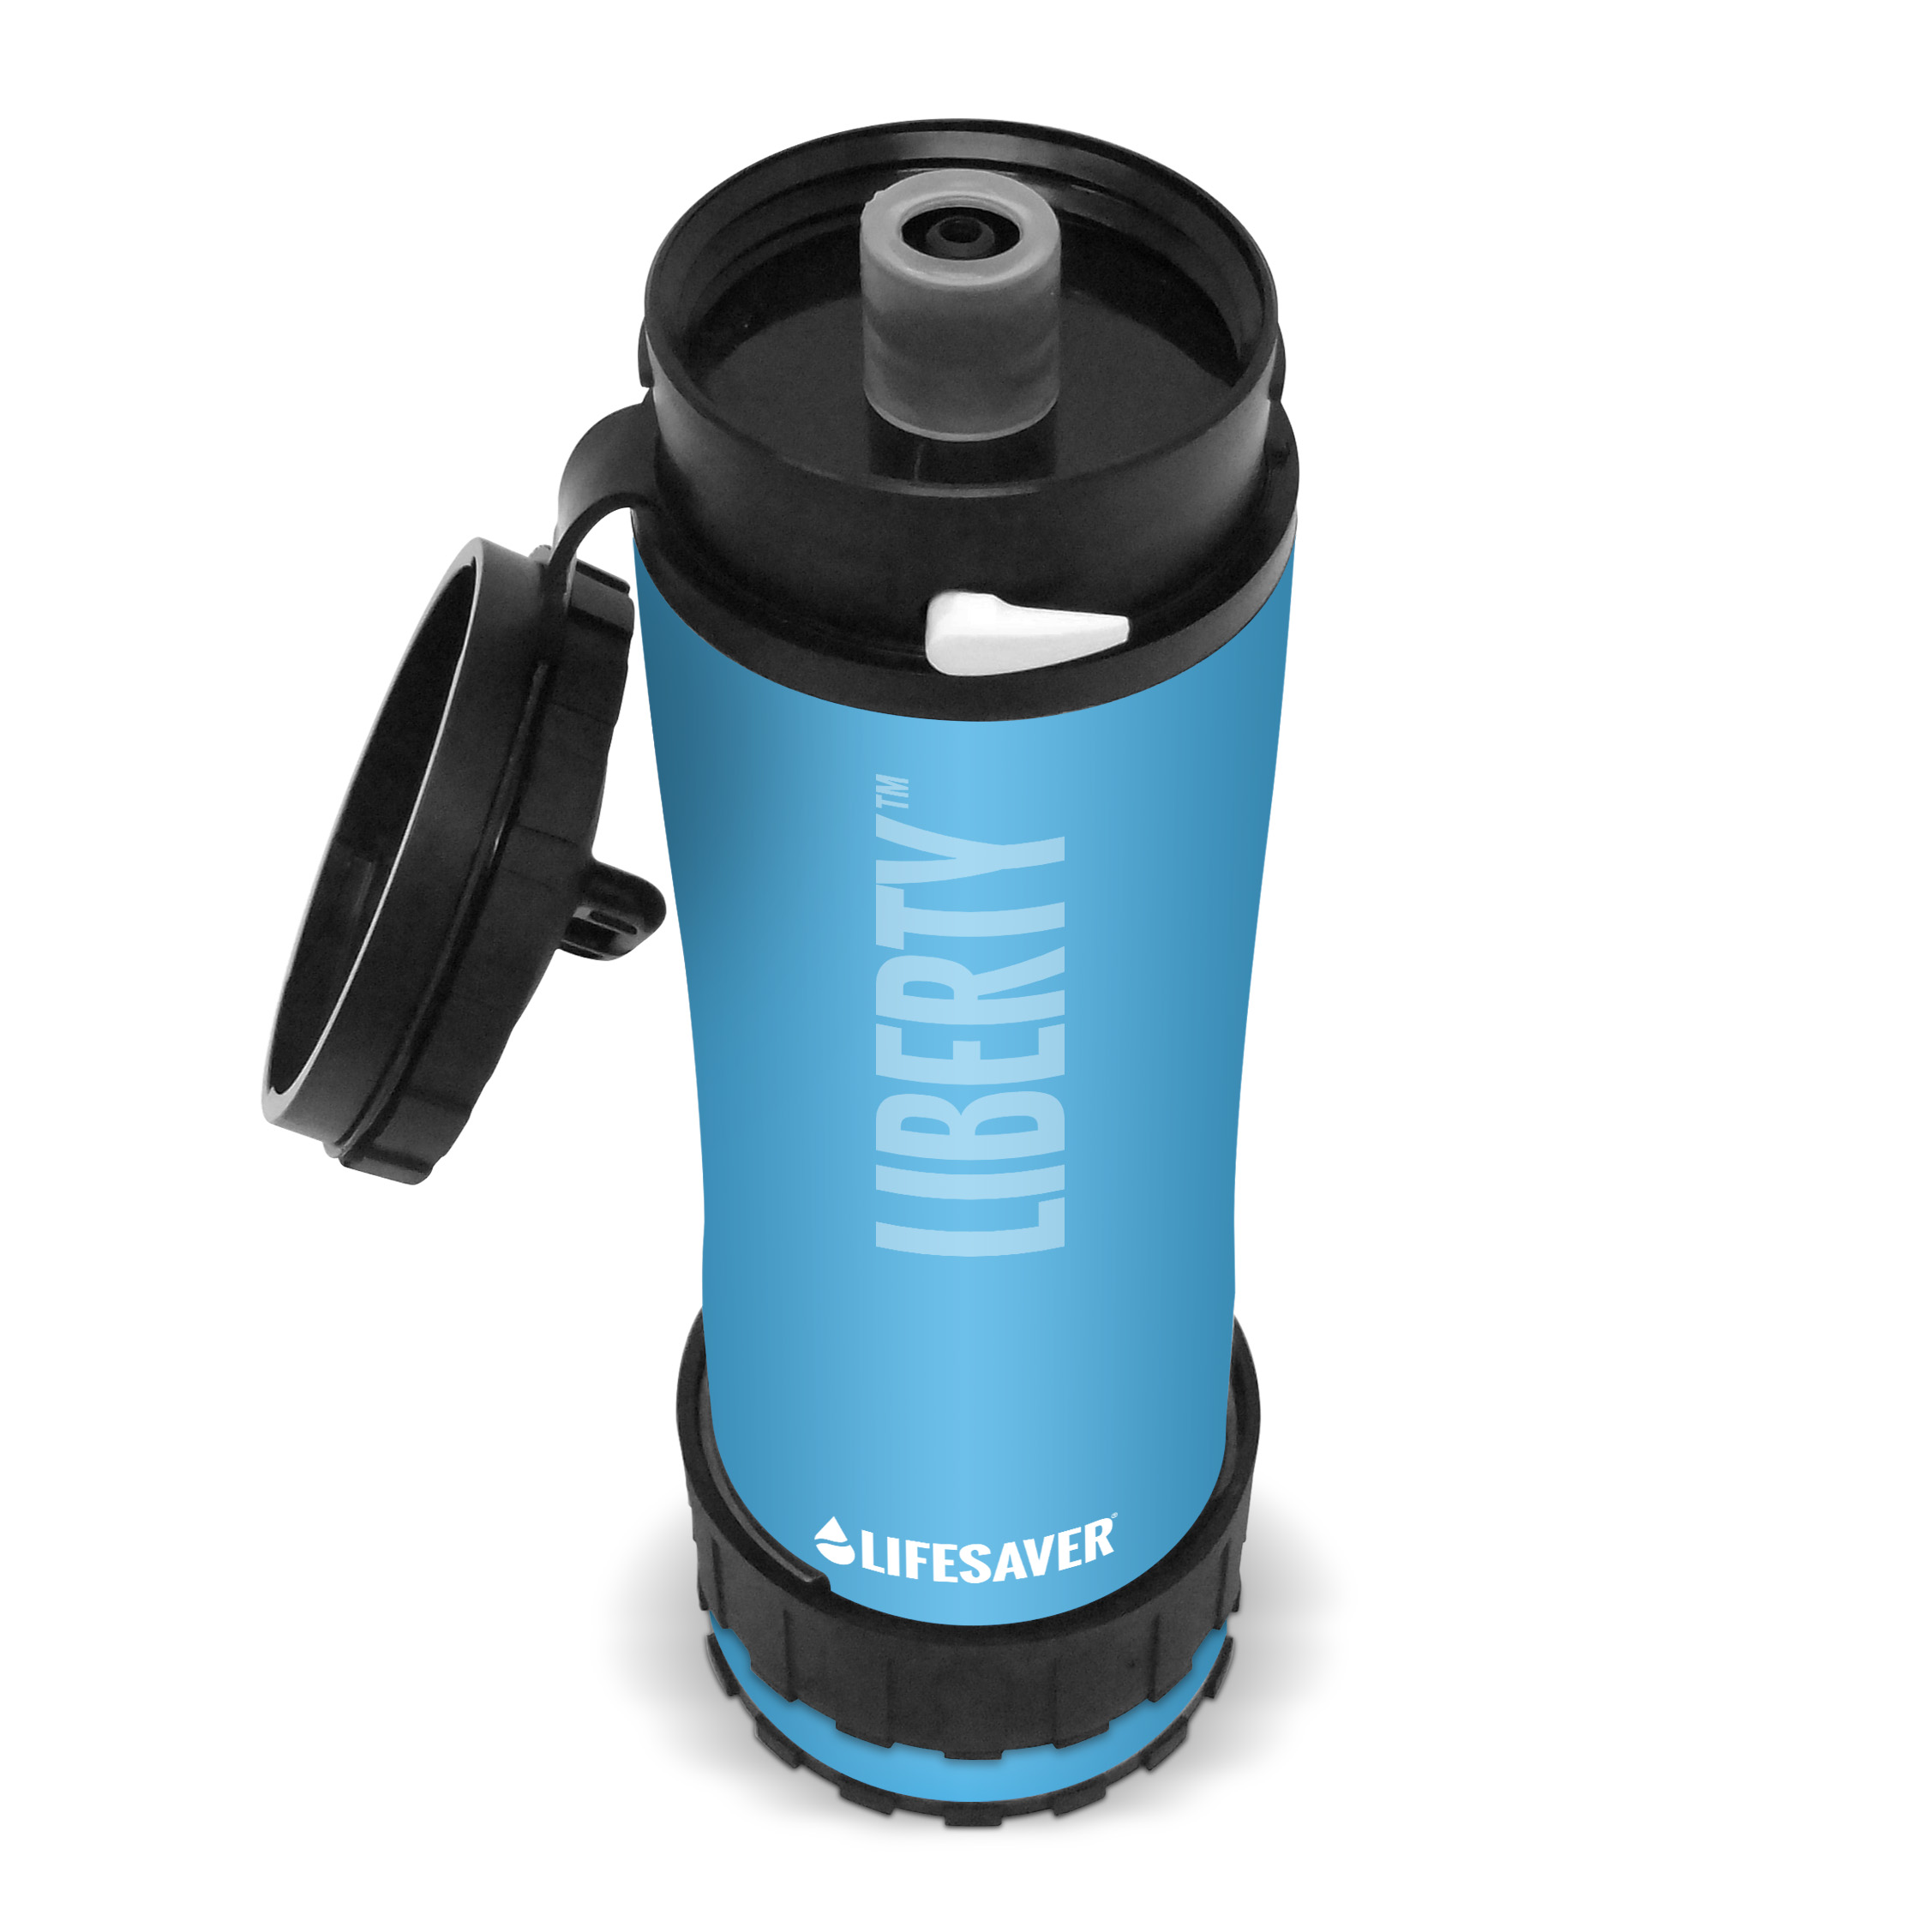 The Lifesaver Liberty Bottle Travel Water Purifier is a great water purification option while traveling to rural and third world areas